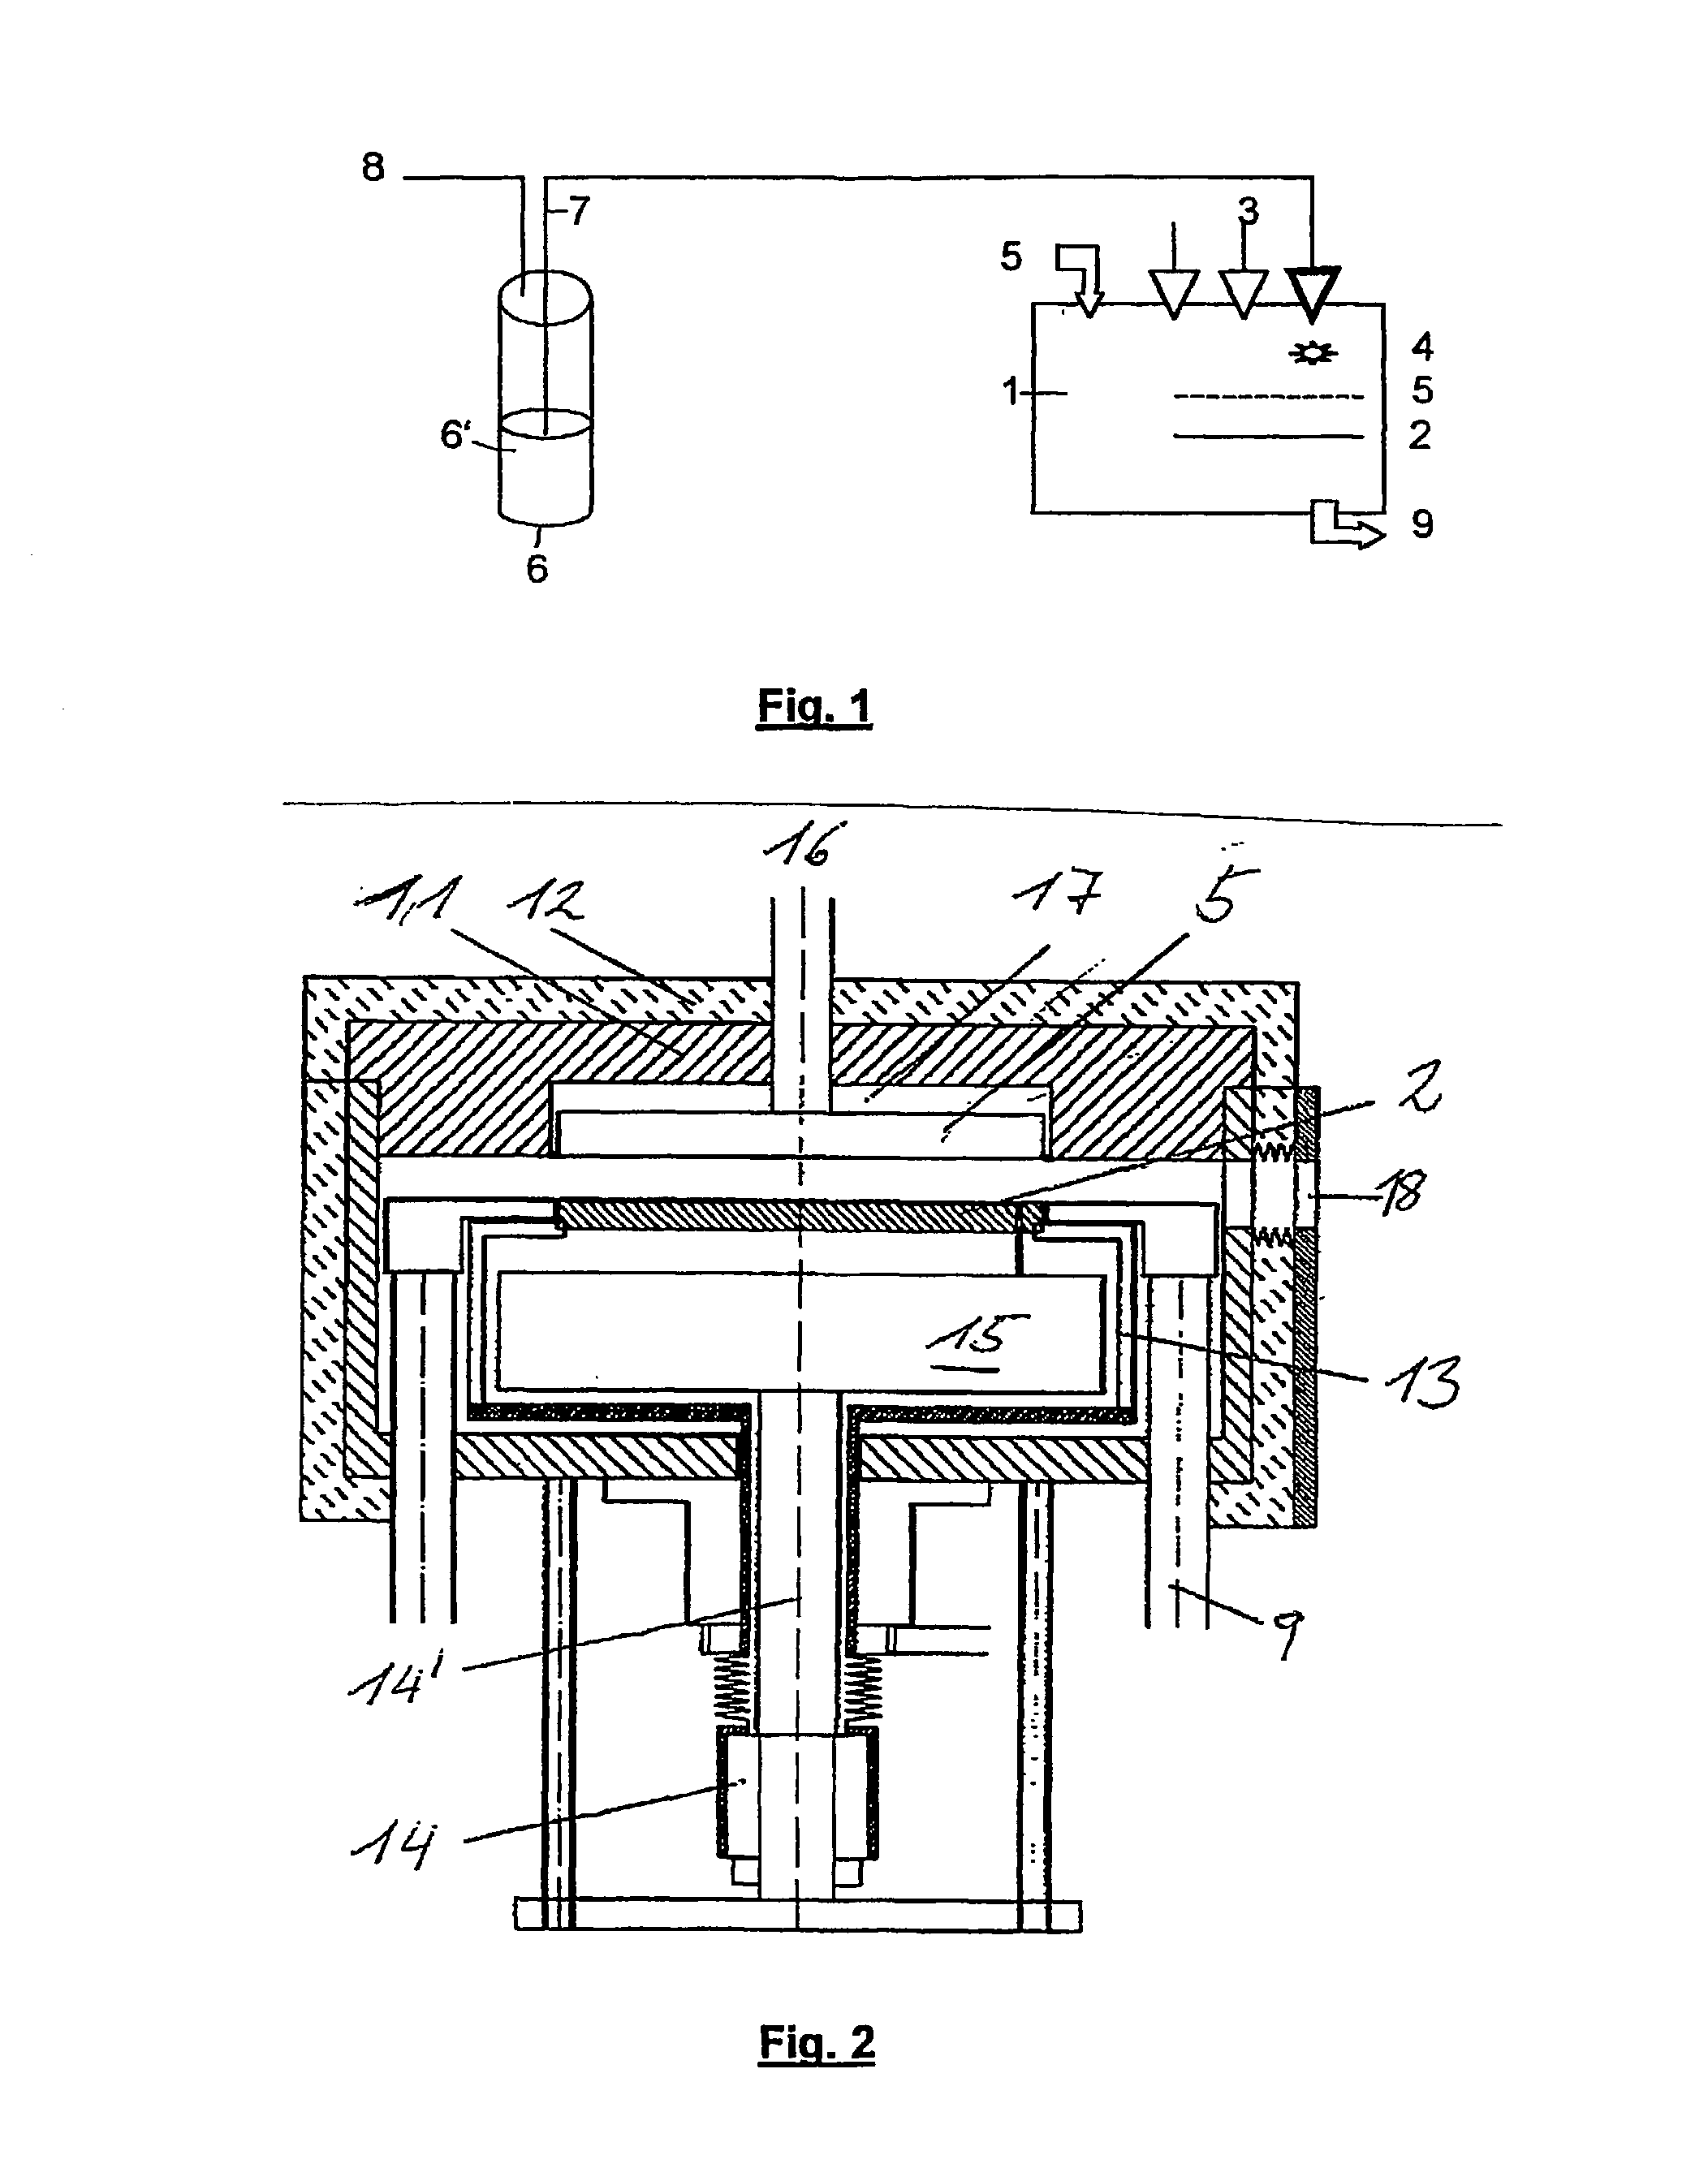 Method and device for depositing at least one precursor, which is in liquid or dissolved form, on at least one substrate